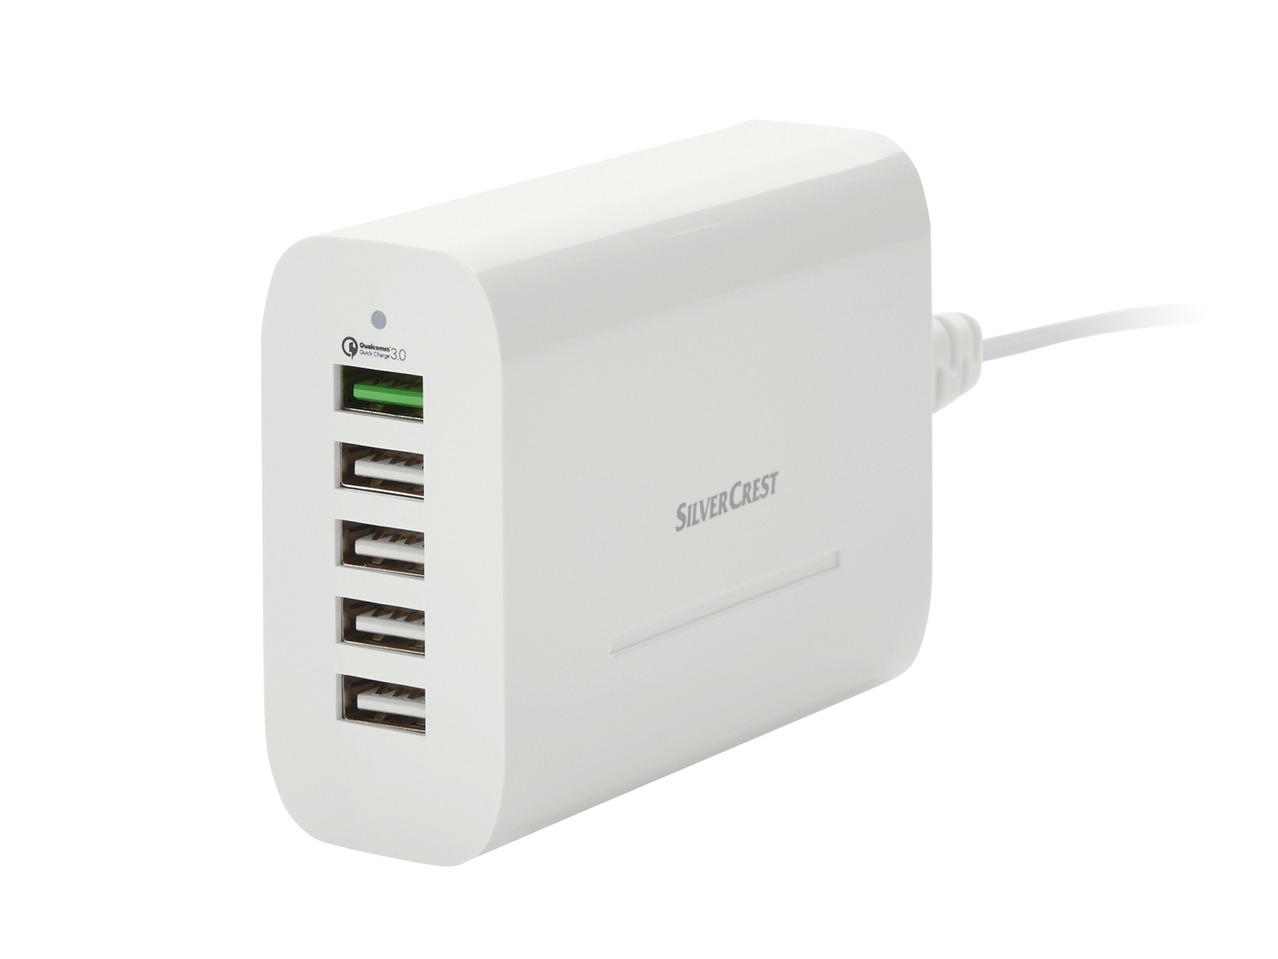 Silvercrest USB Charger1